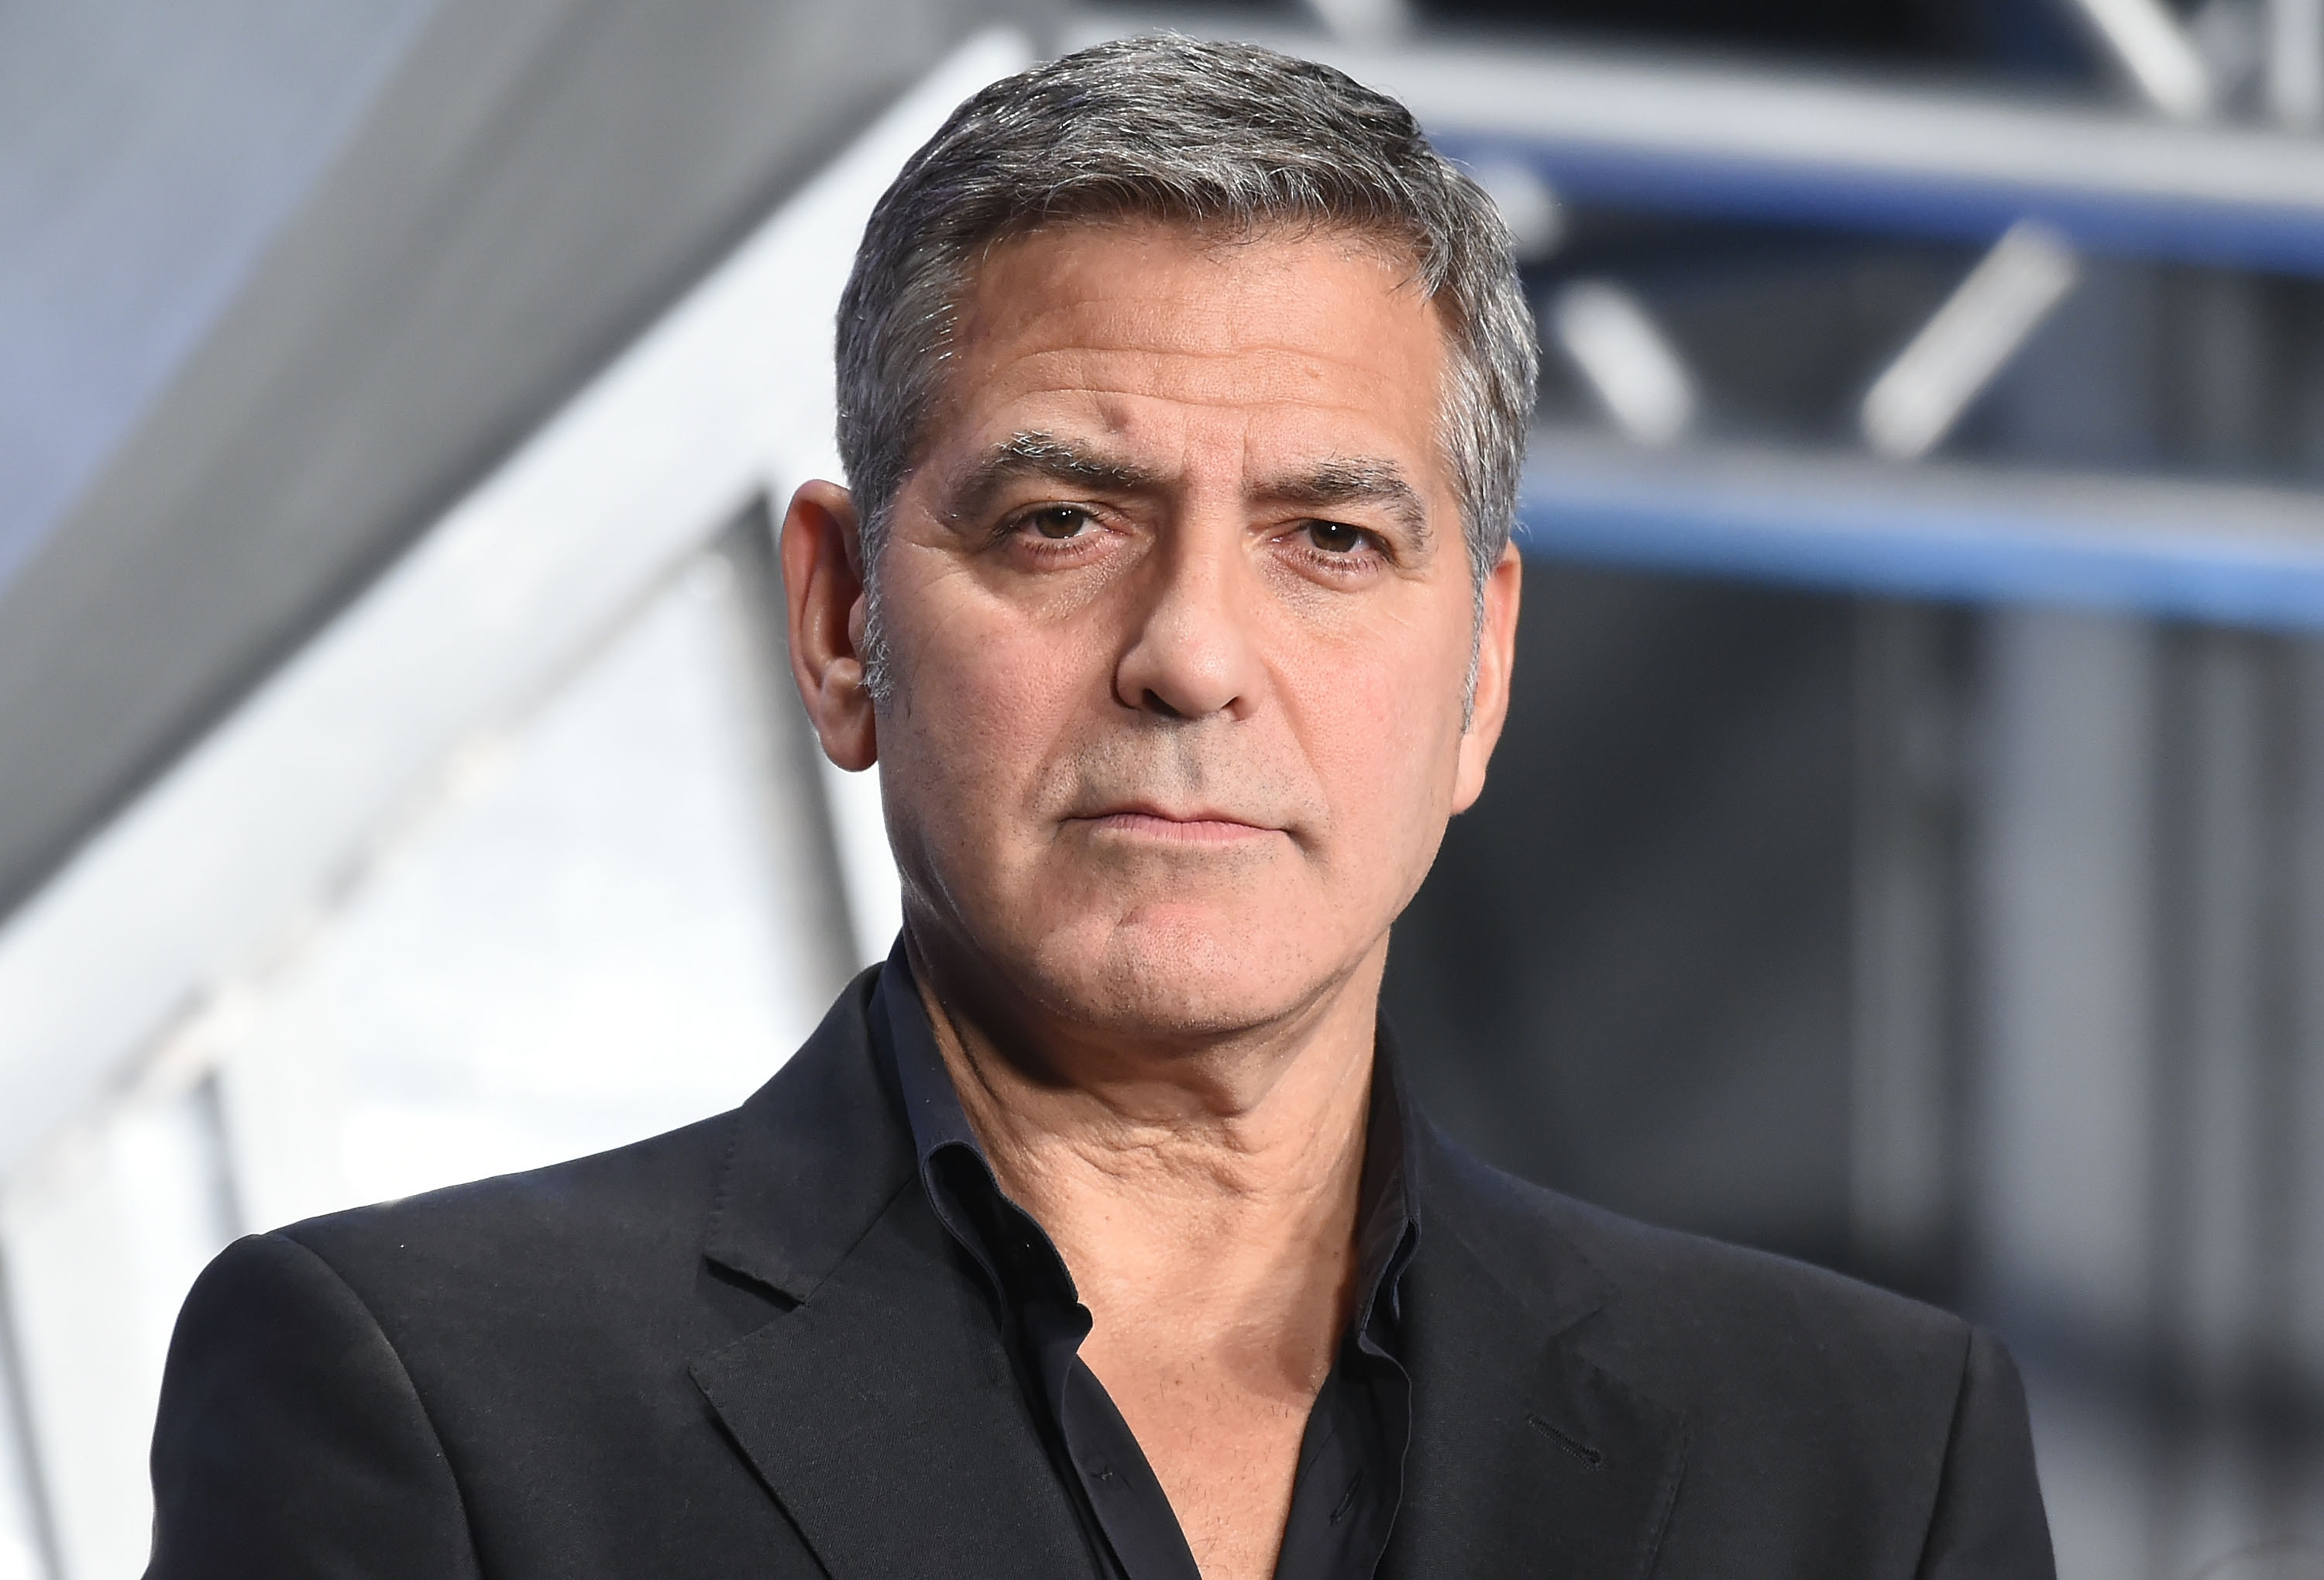 George Clooney attends the Tokyo premiere of 